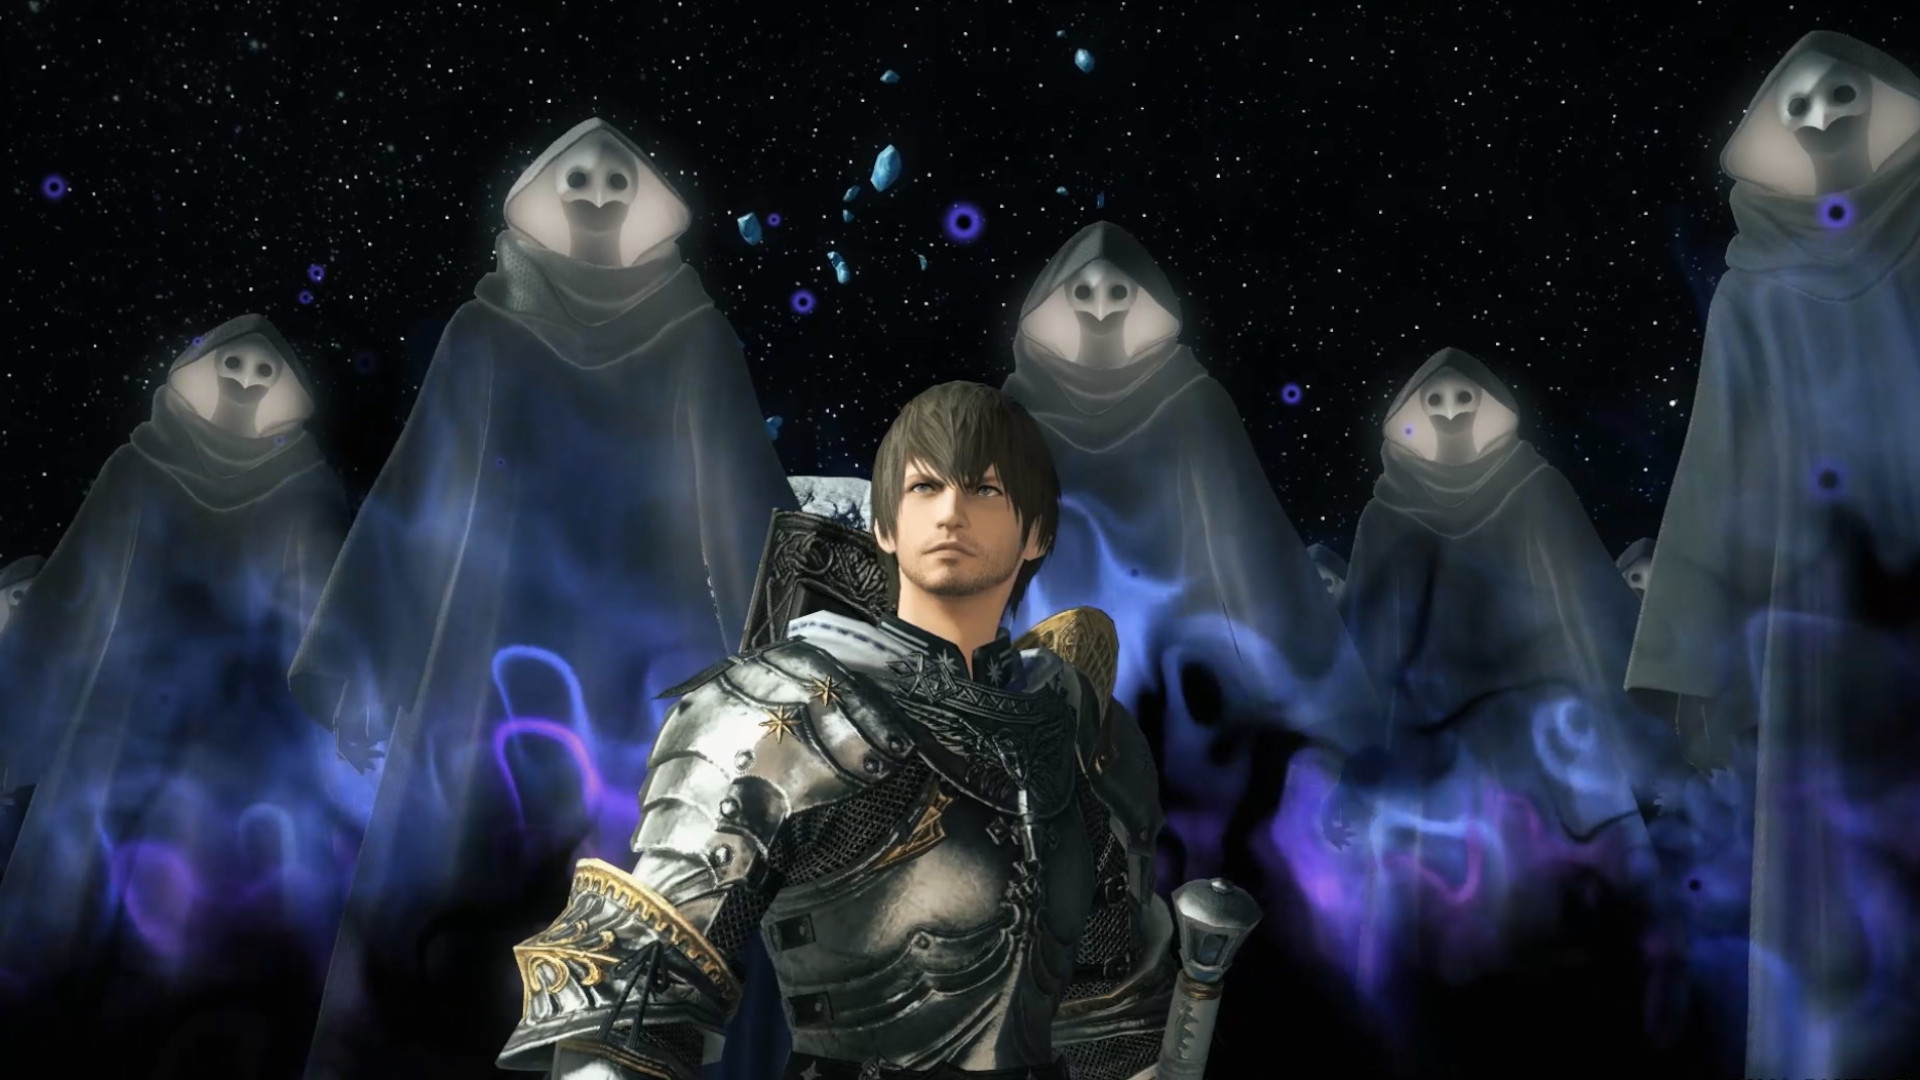 FFXIV Endwalker release time – get your registration code ready after early access